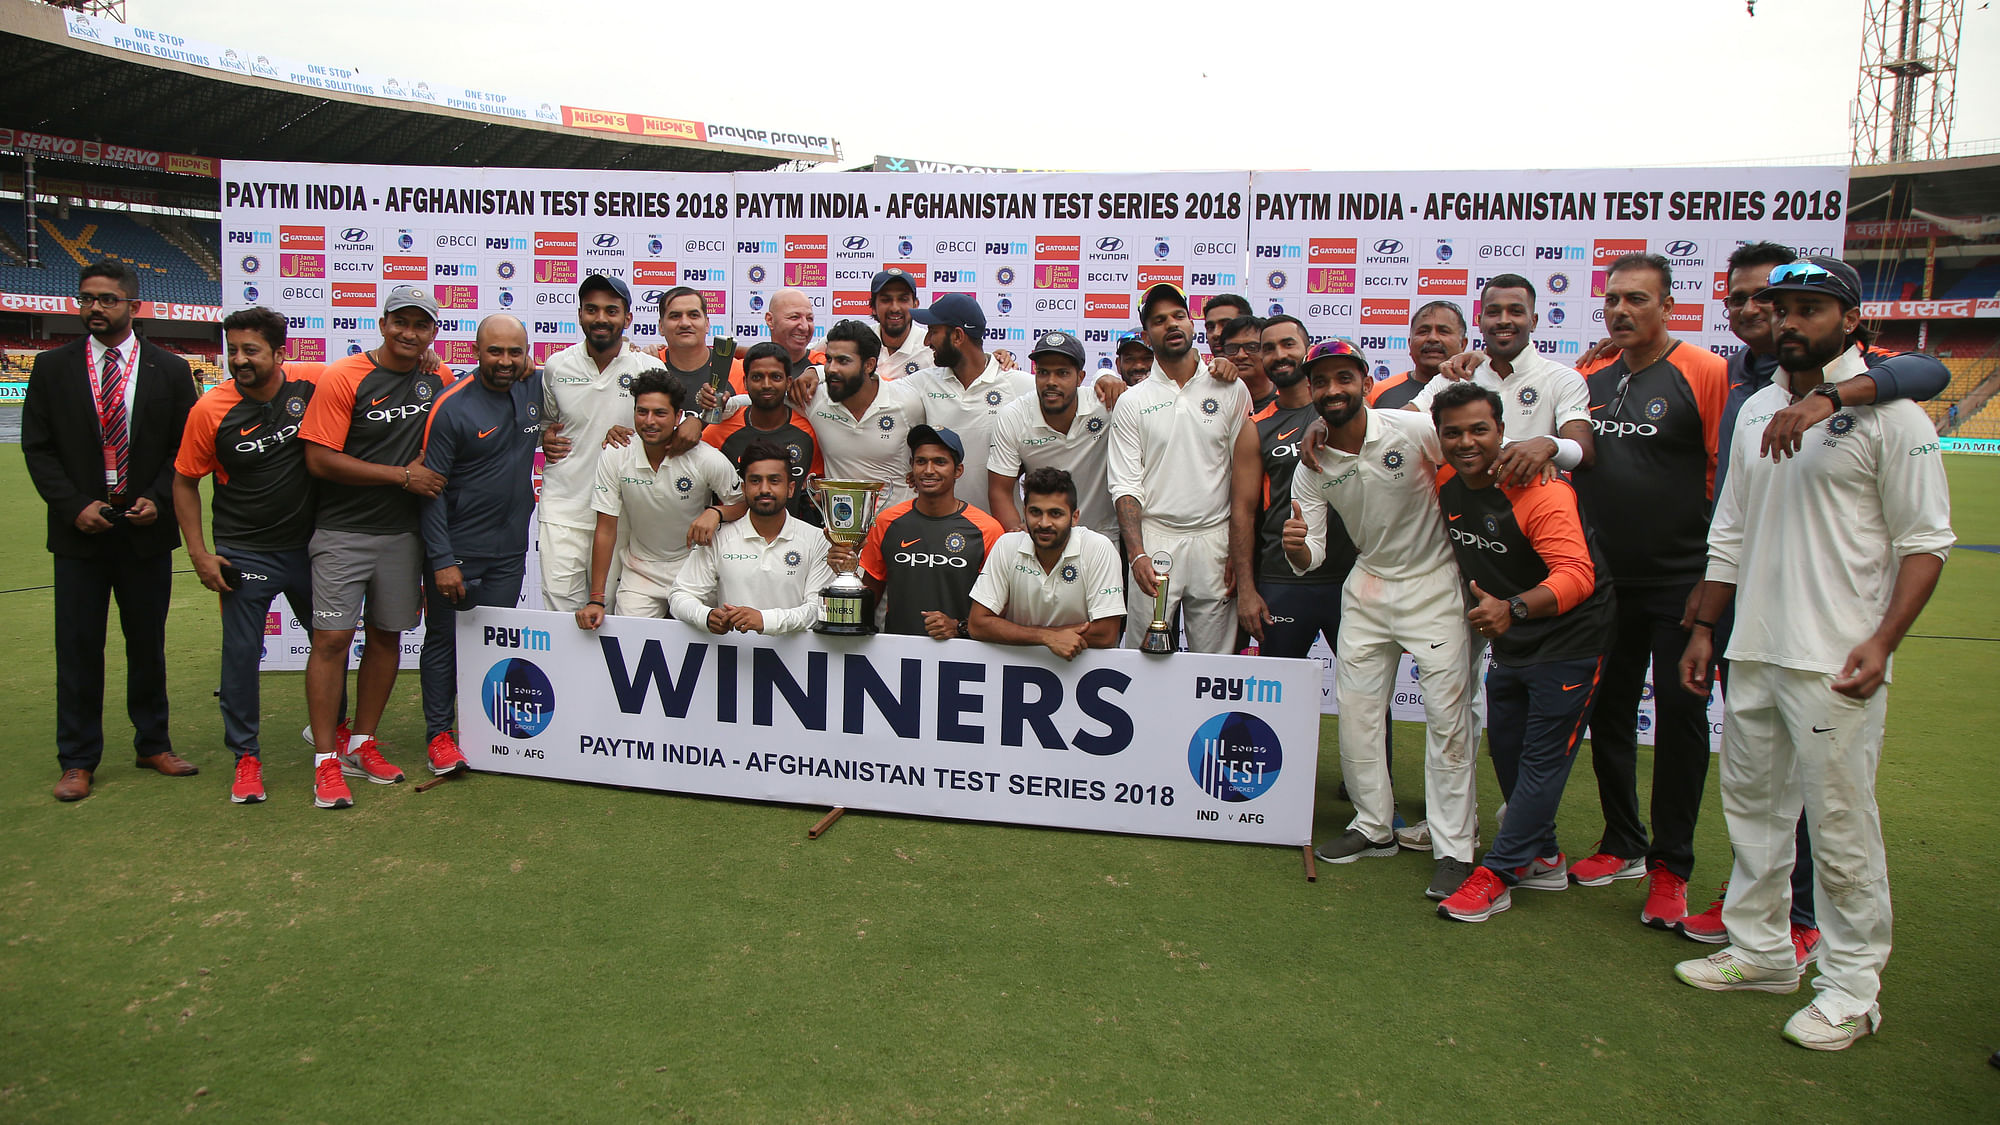 The Indian team poses with the trophy after beating Afghanistan in the only Test in Bengaluru on Friday.